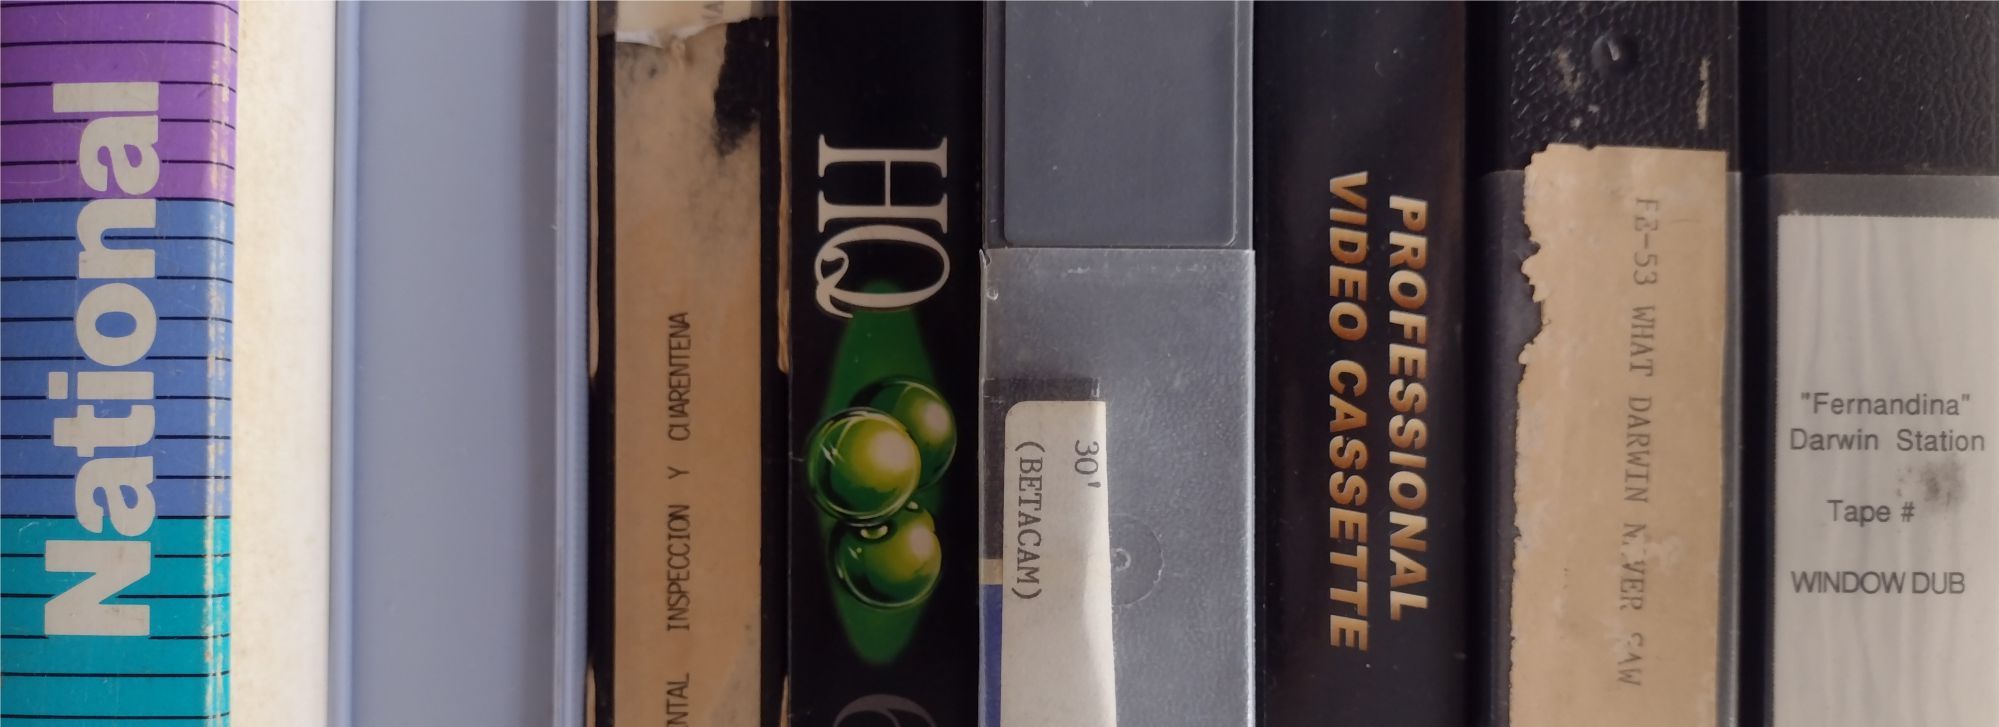 VHS tapes